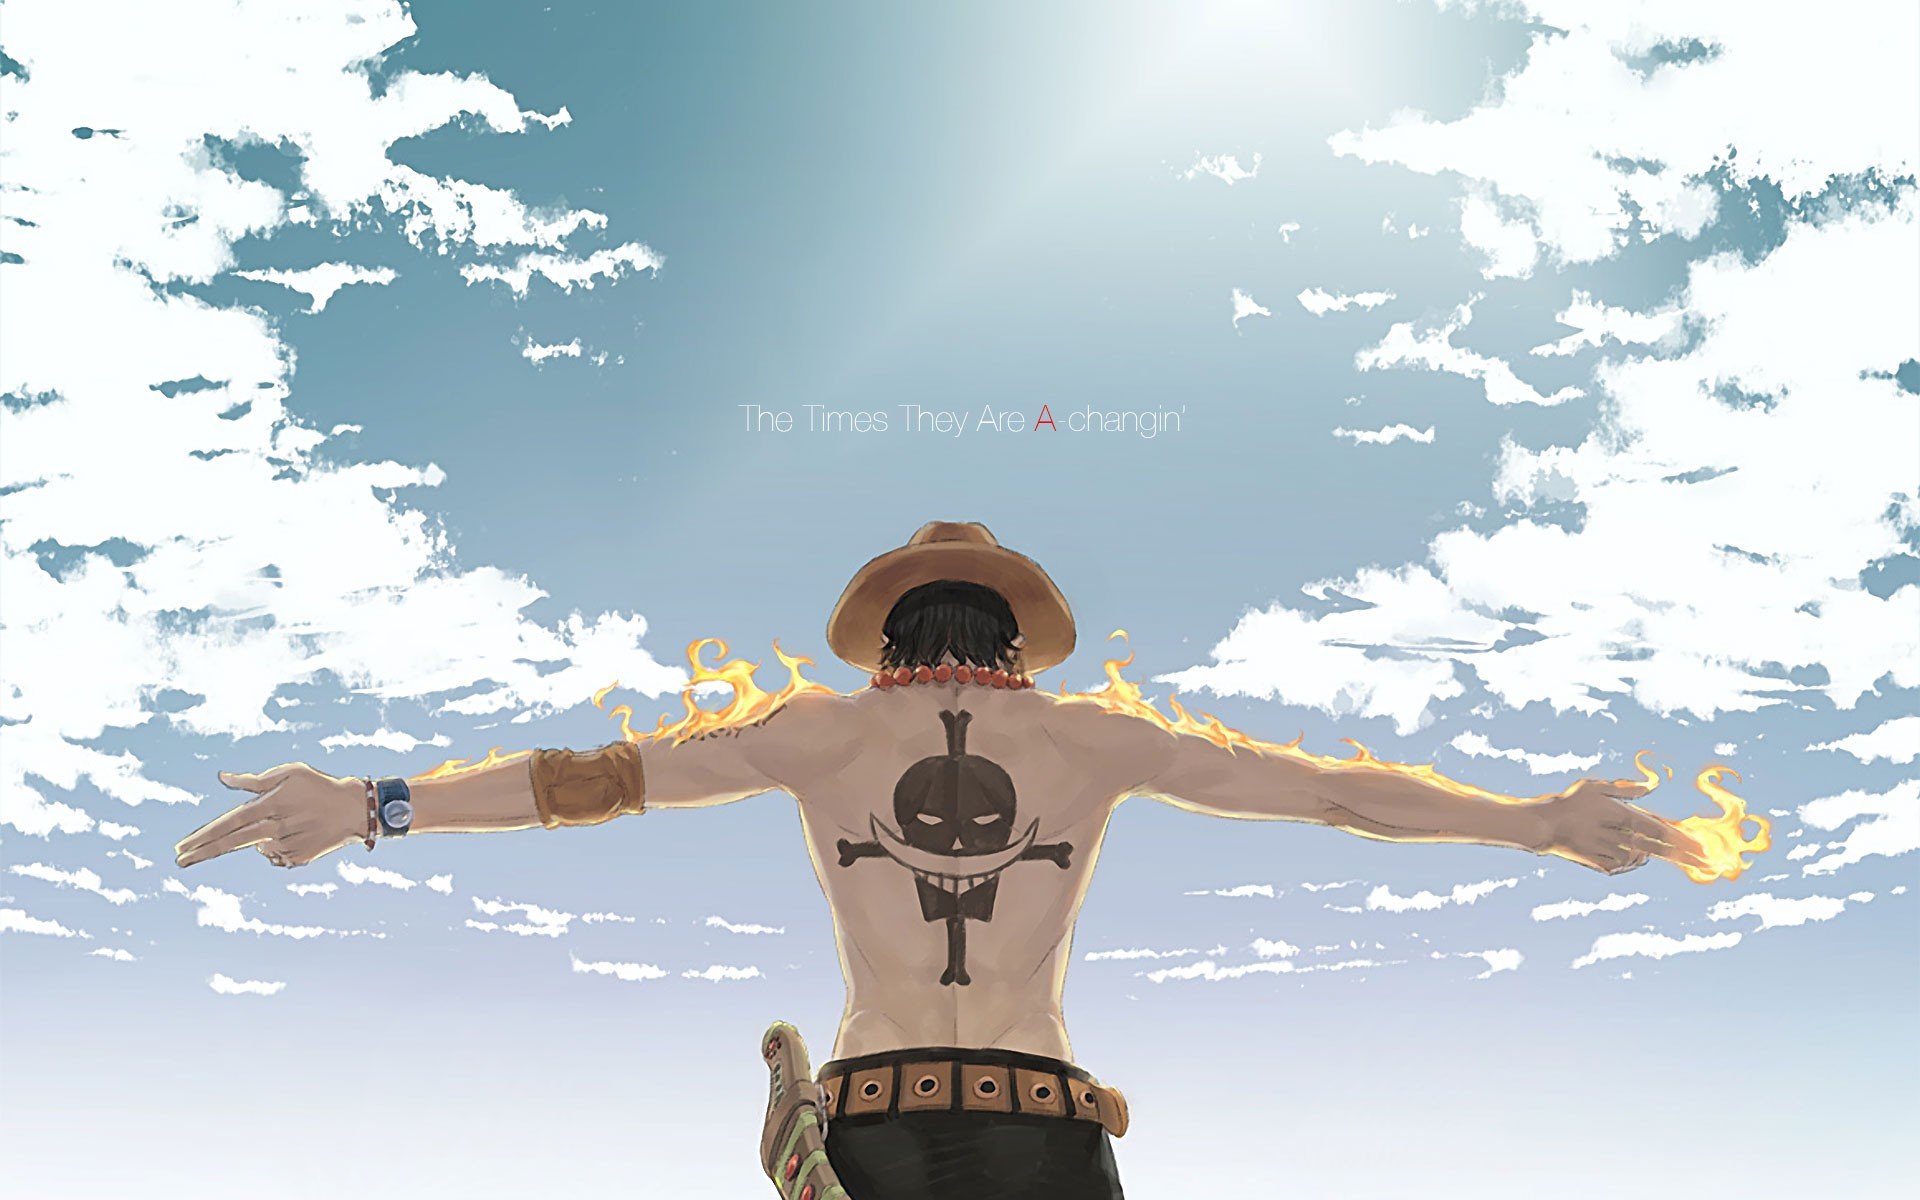 720x1280 197 One Piece AppleiPhone 5 640x1136 Wallpapers  Mobile Abyss   Ace one piece Anime One piece anime